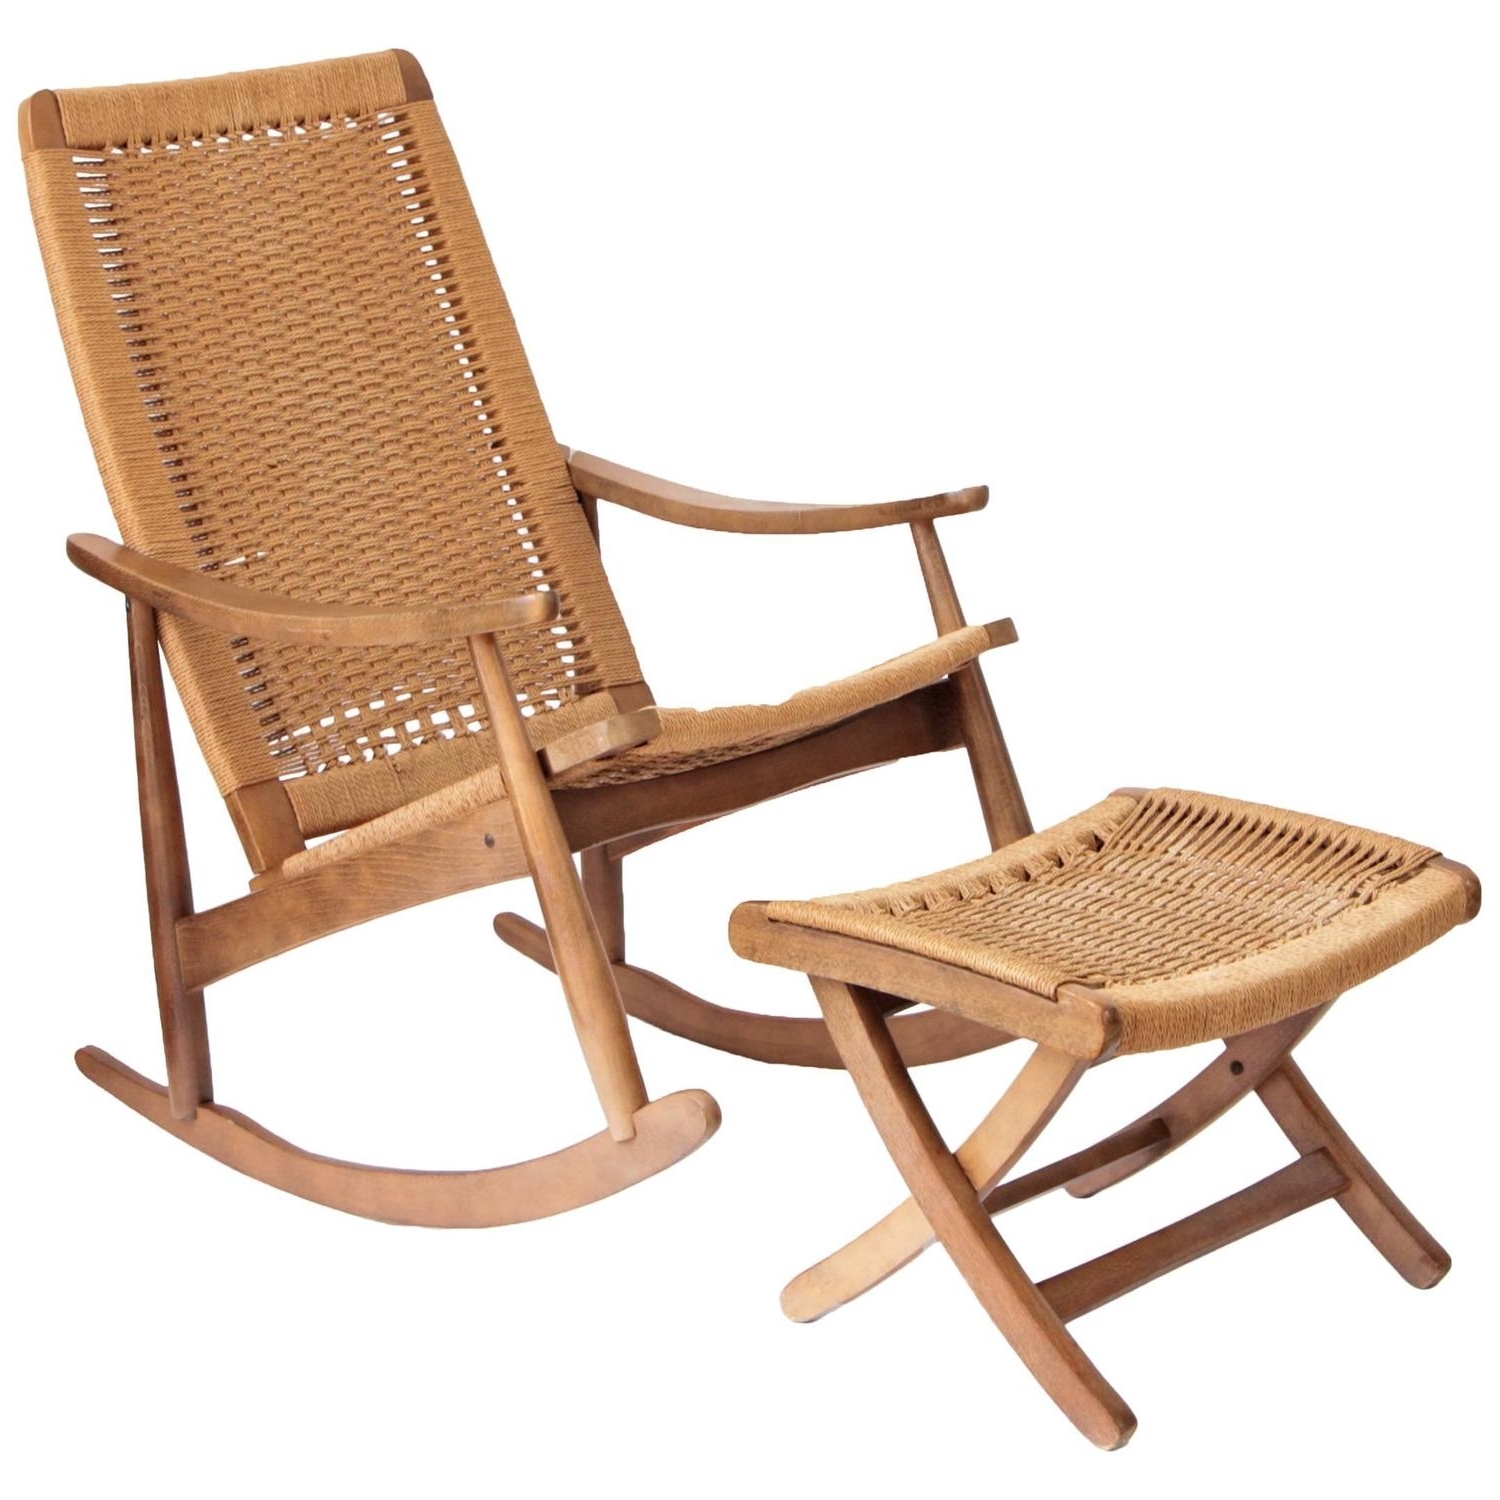 Patio Rocking Chairs With Ottoman